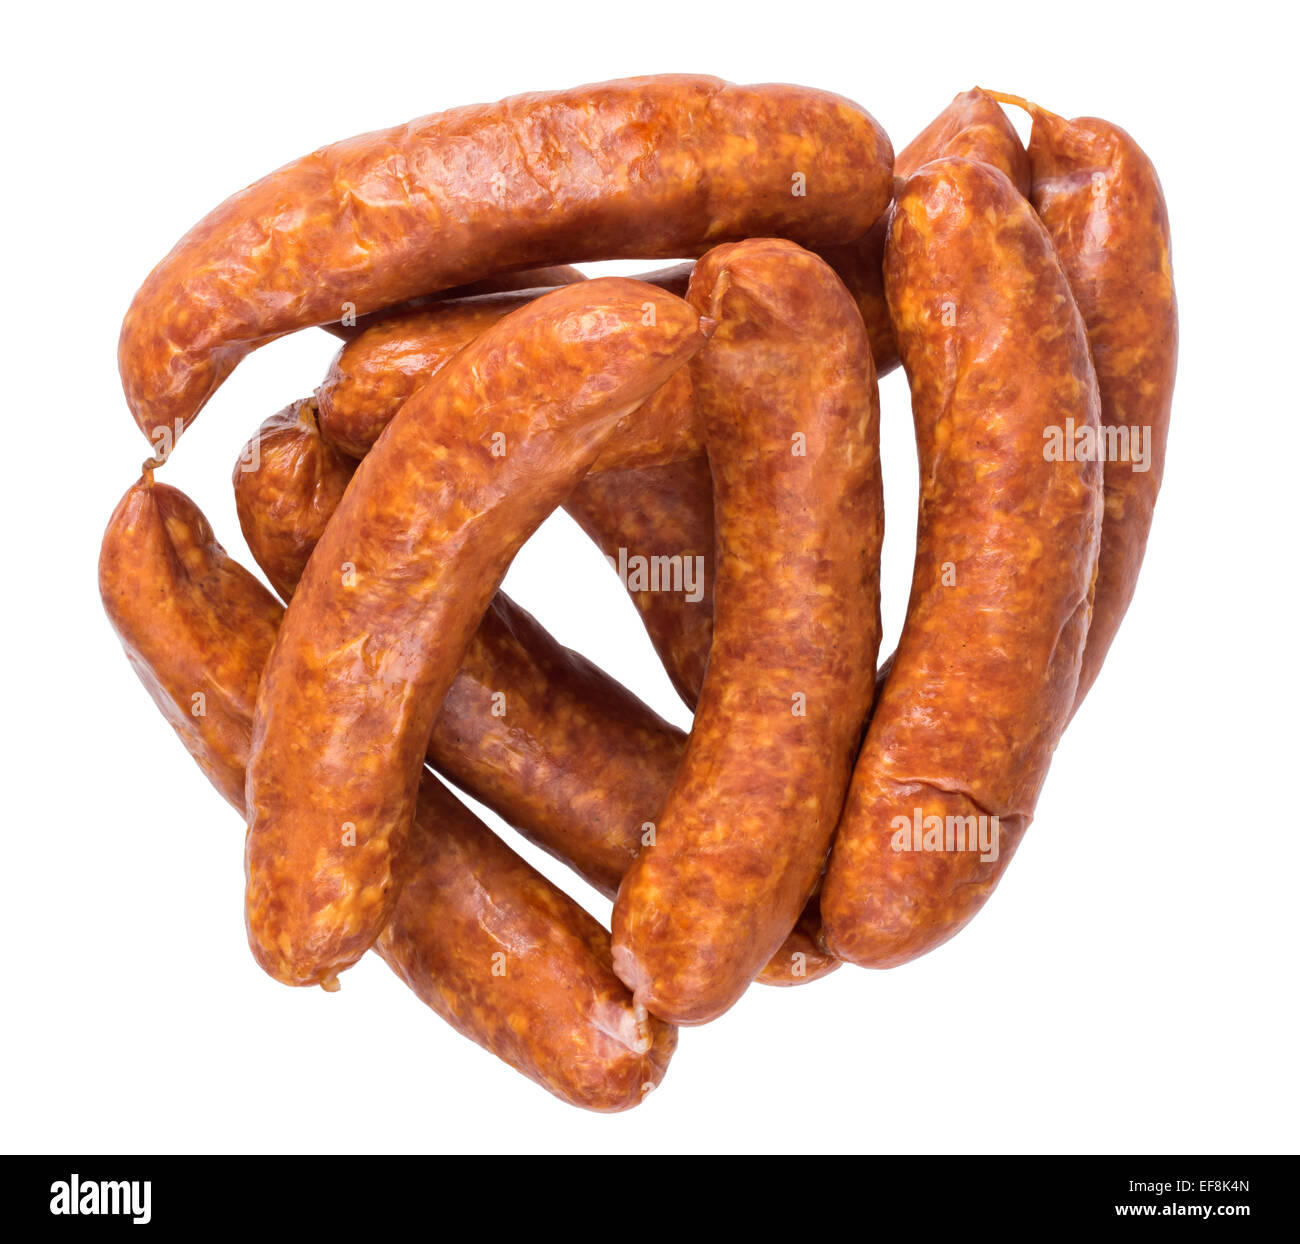 Smoked pork sausages made from minced meat isolated on white Stock Photo